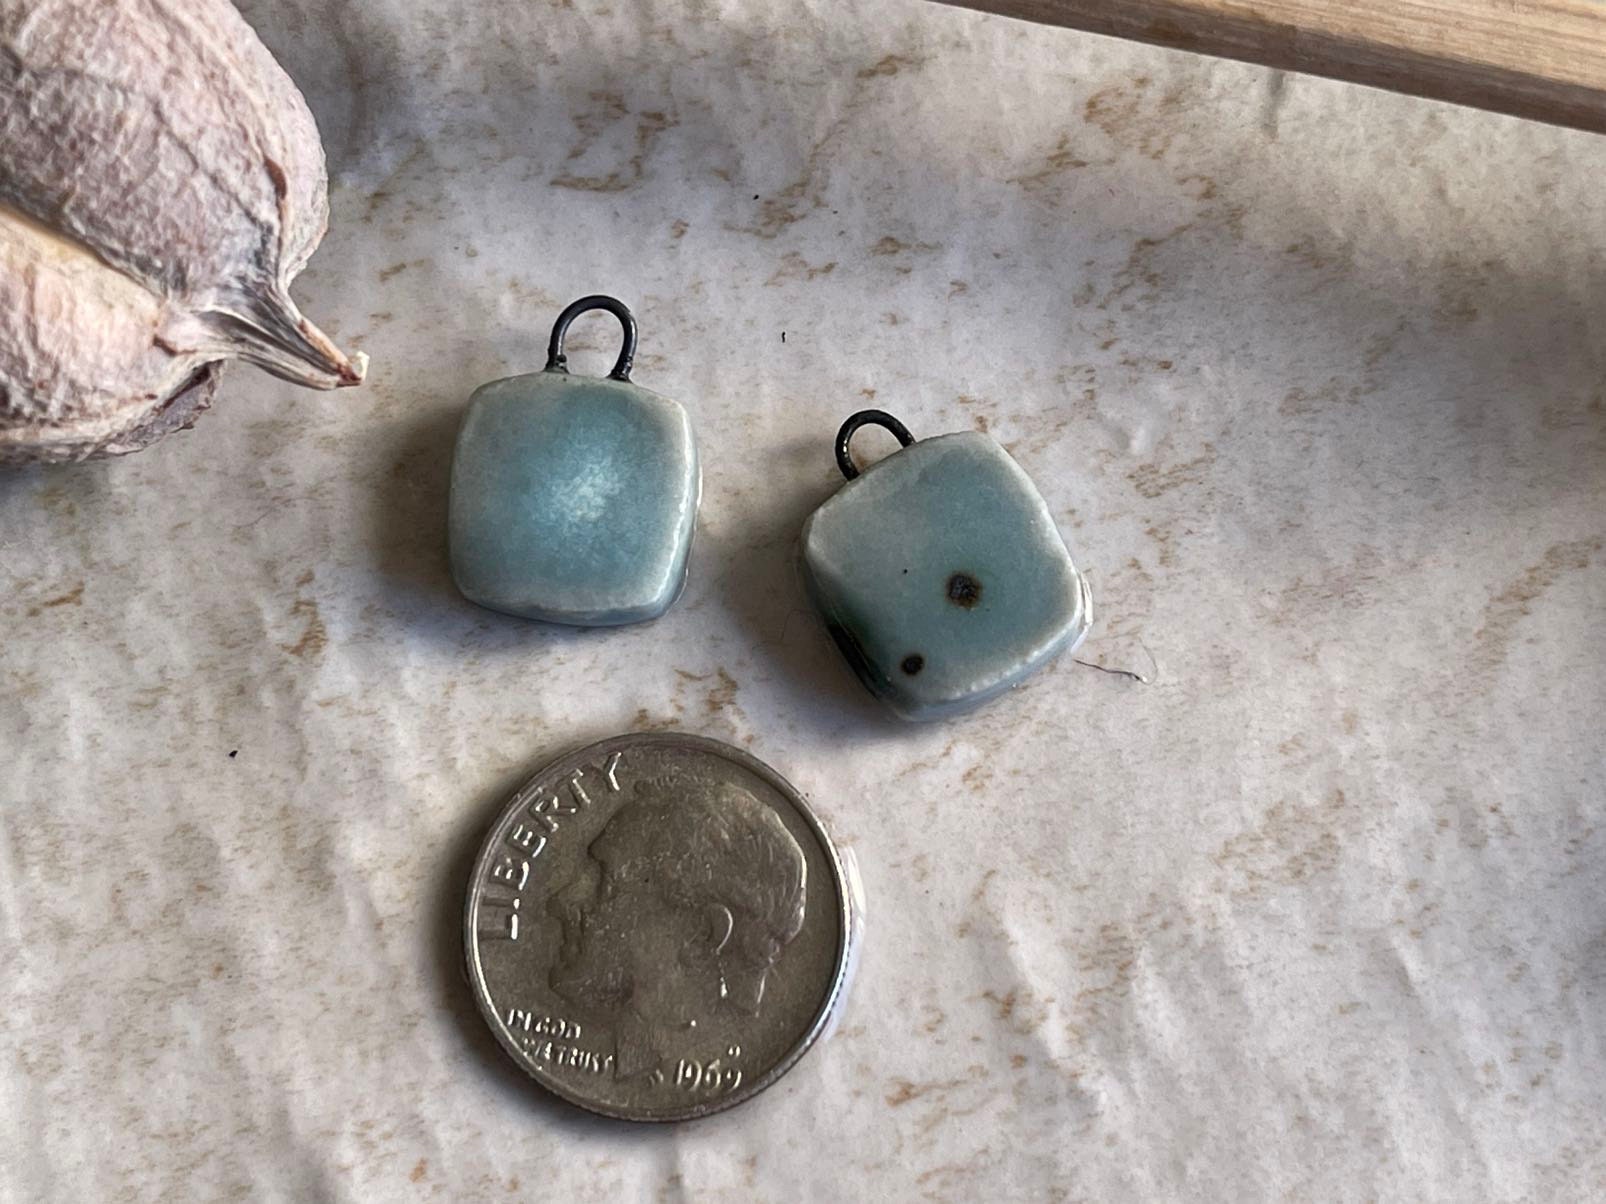 Tiny Blue Charm Set, Porcelain Beads, Flower Bead Set, Ceramic Charms, Jewelry Making Components, DIY  Beads